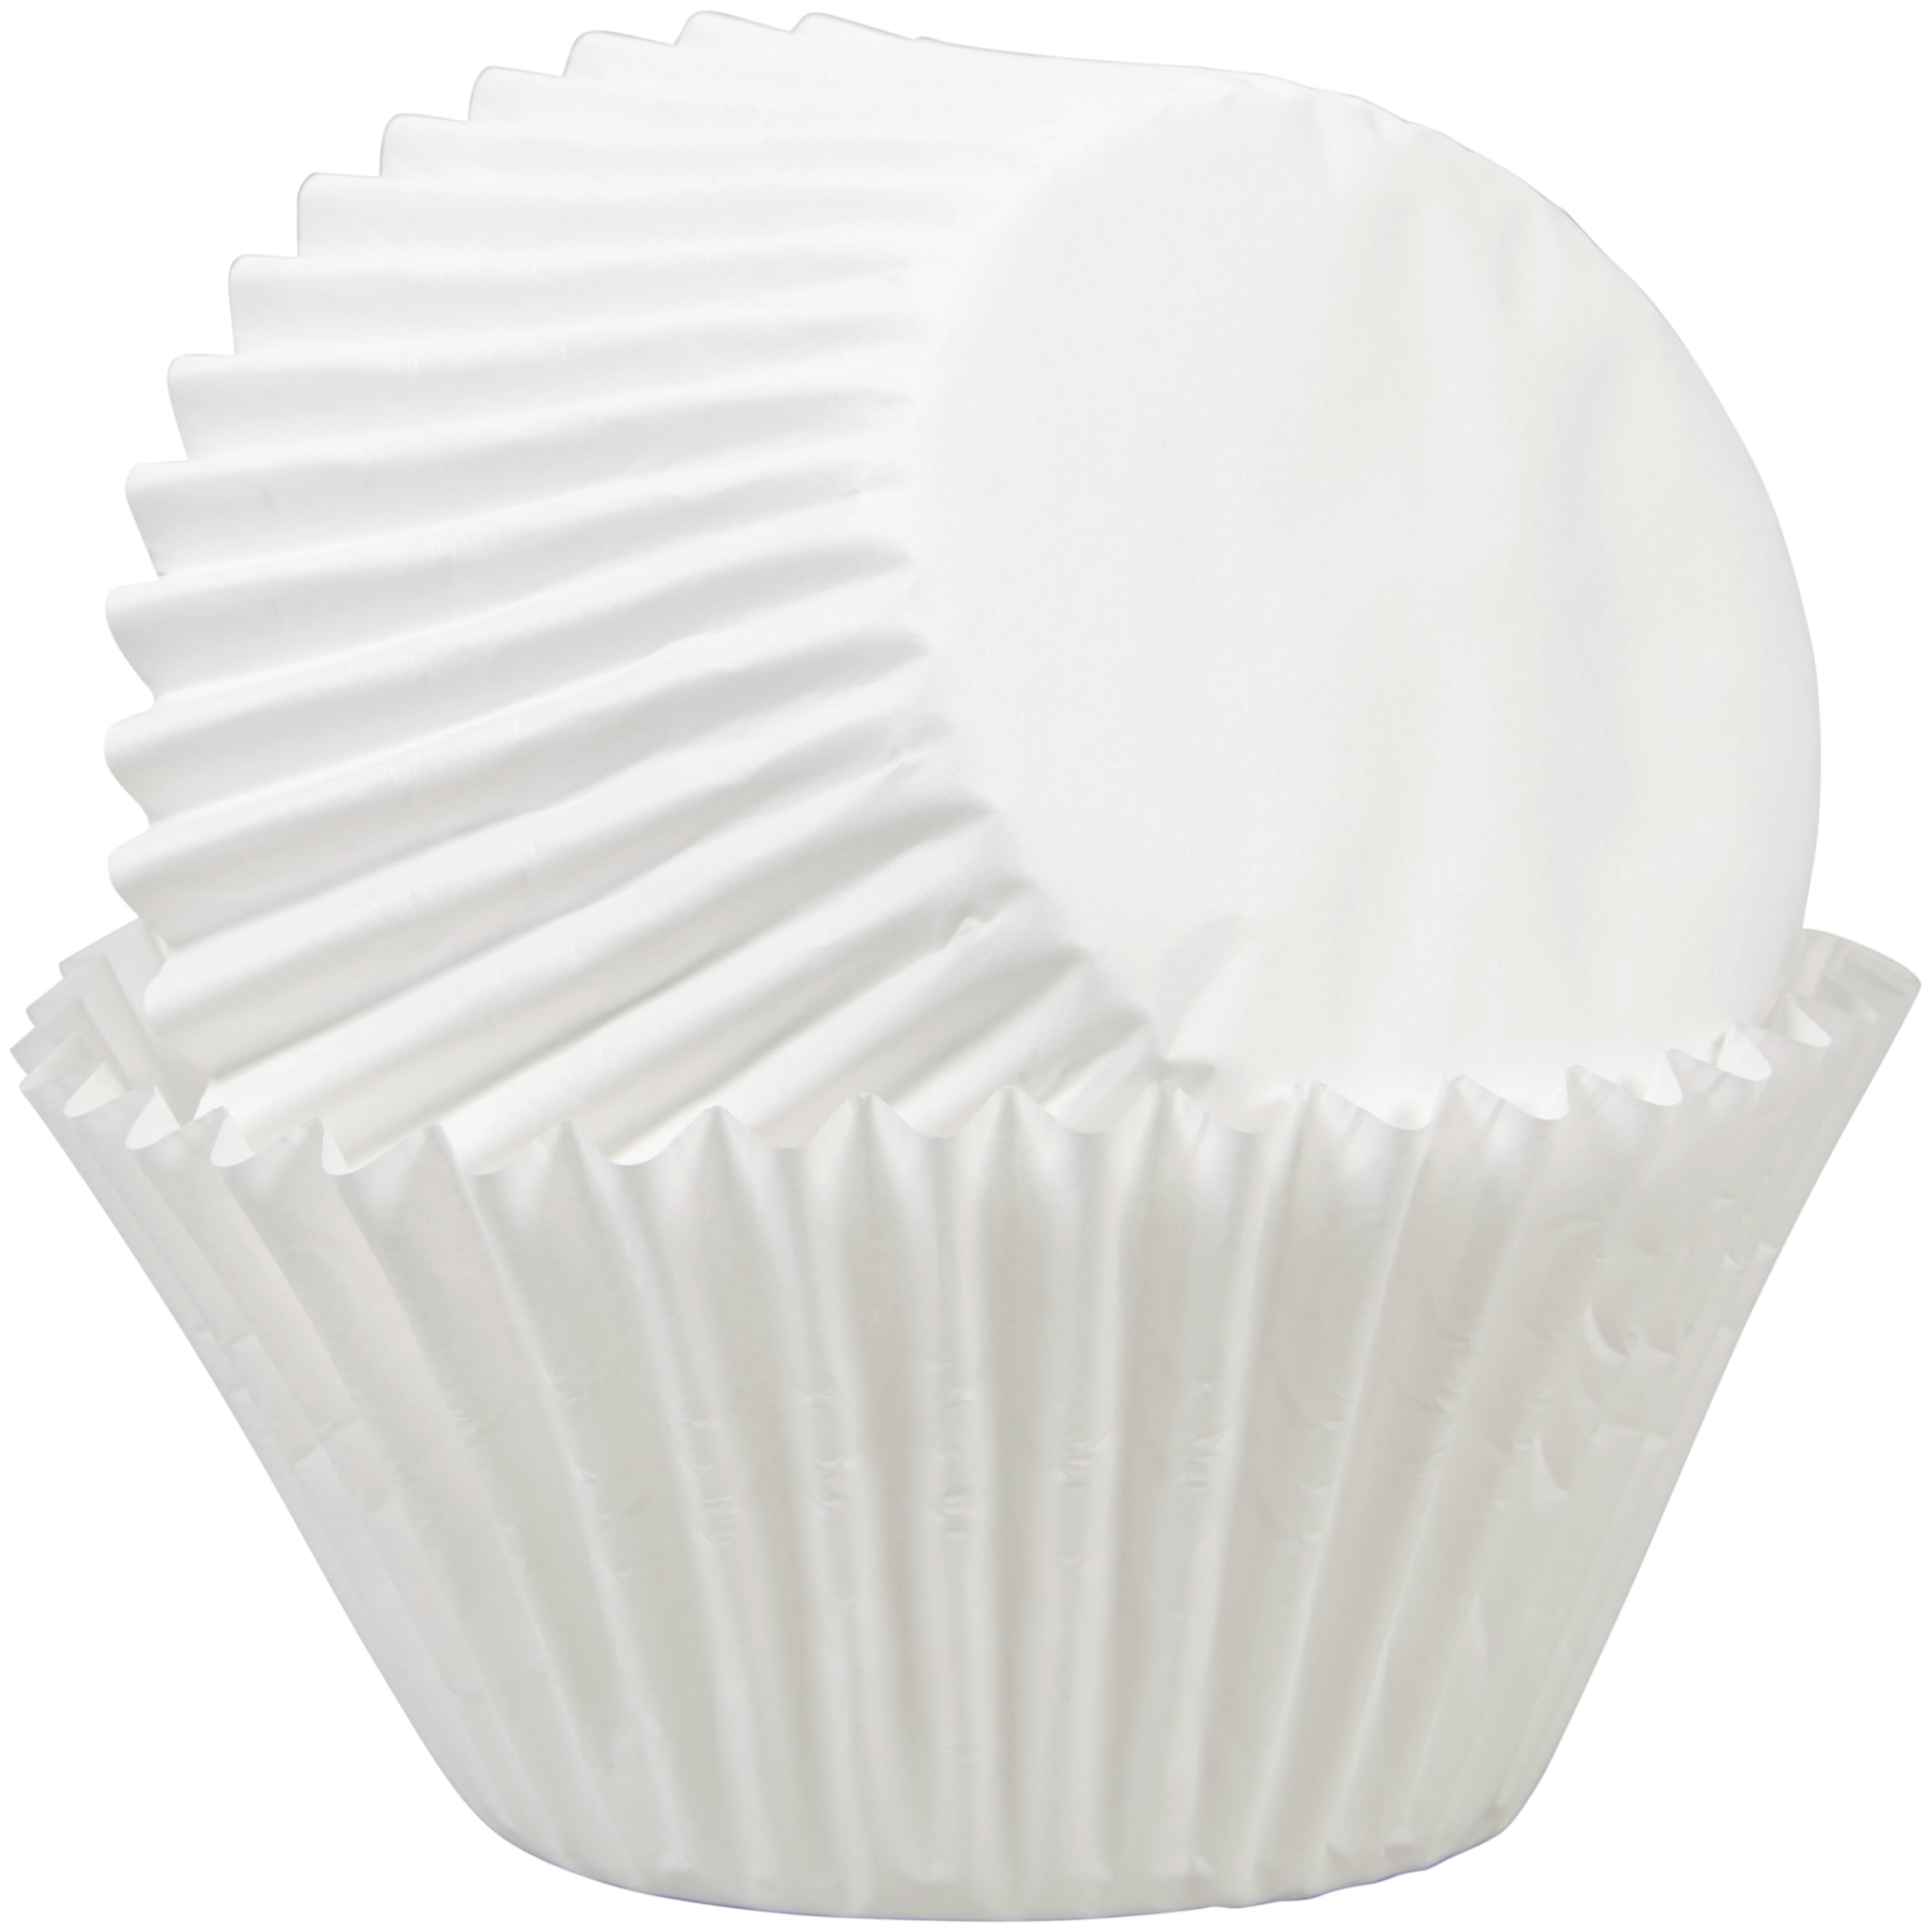 Golden BESTONZON 50Pcs Cupcake Wrappers Baking Cups Tulip Shape Liners Muffin Cake Cup Party Favors